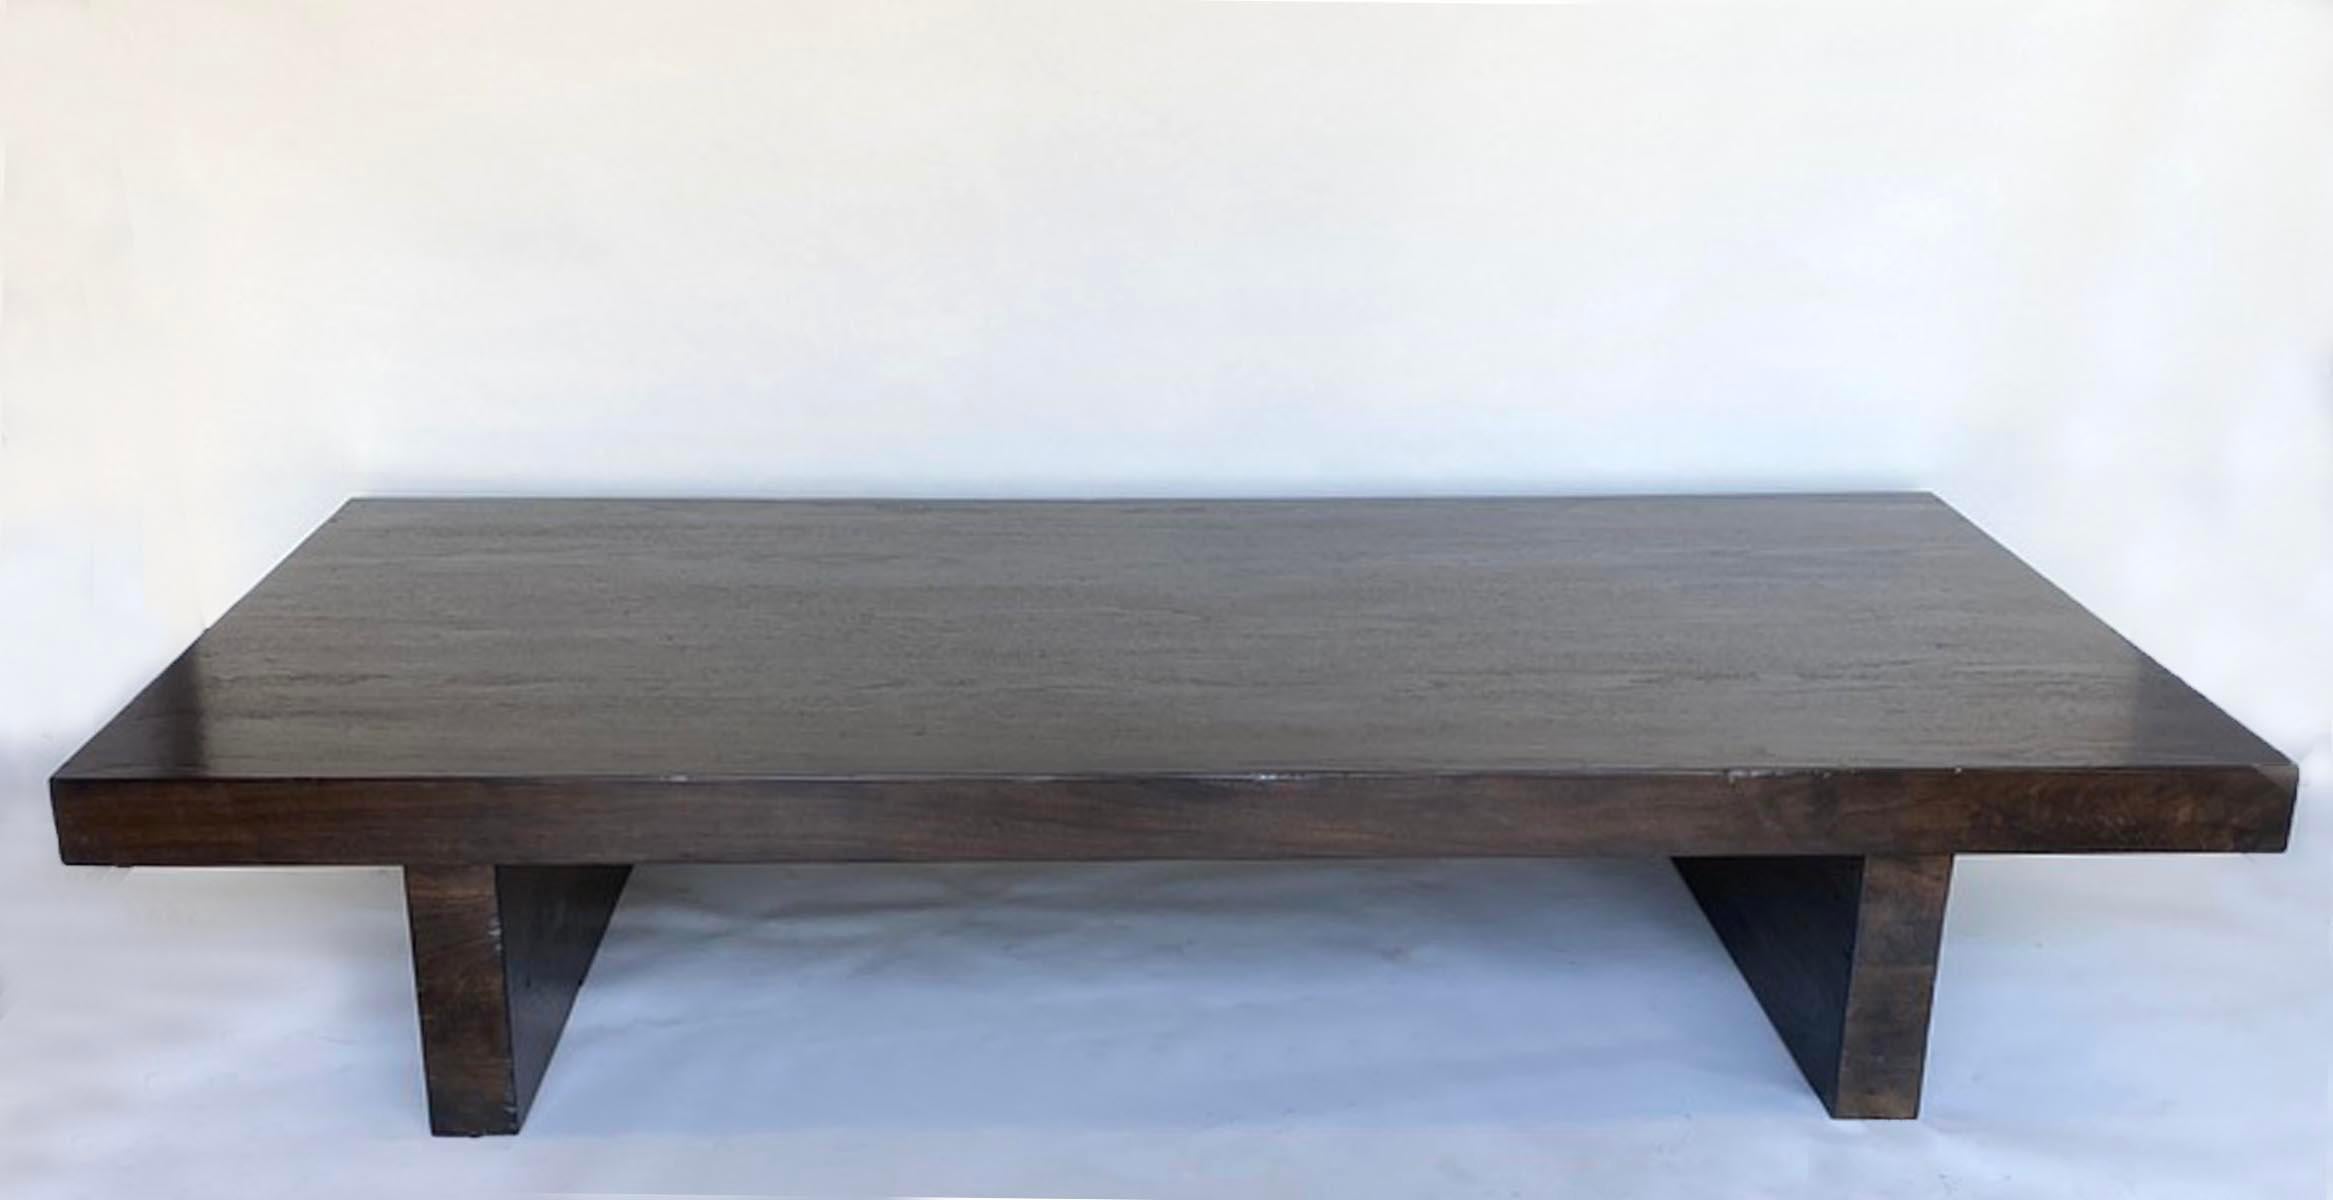 Custom low profile thick slab modern coffee table. As shown in Walnut with a custom medium to dark finish and light distress. range of colors. 
Bench made and hand finished in Los Angeles by Dos Gallos Studio.
DUE TO CHANGING PRICES OF WOOD AND